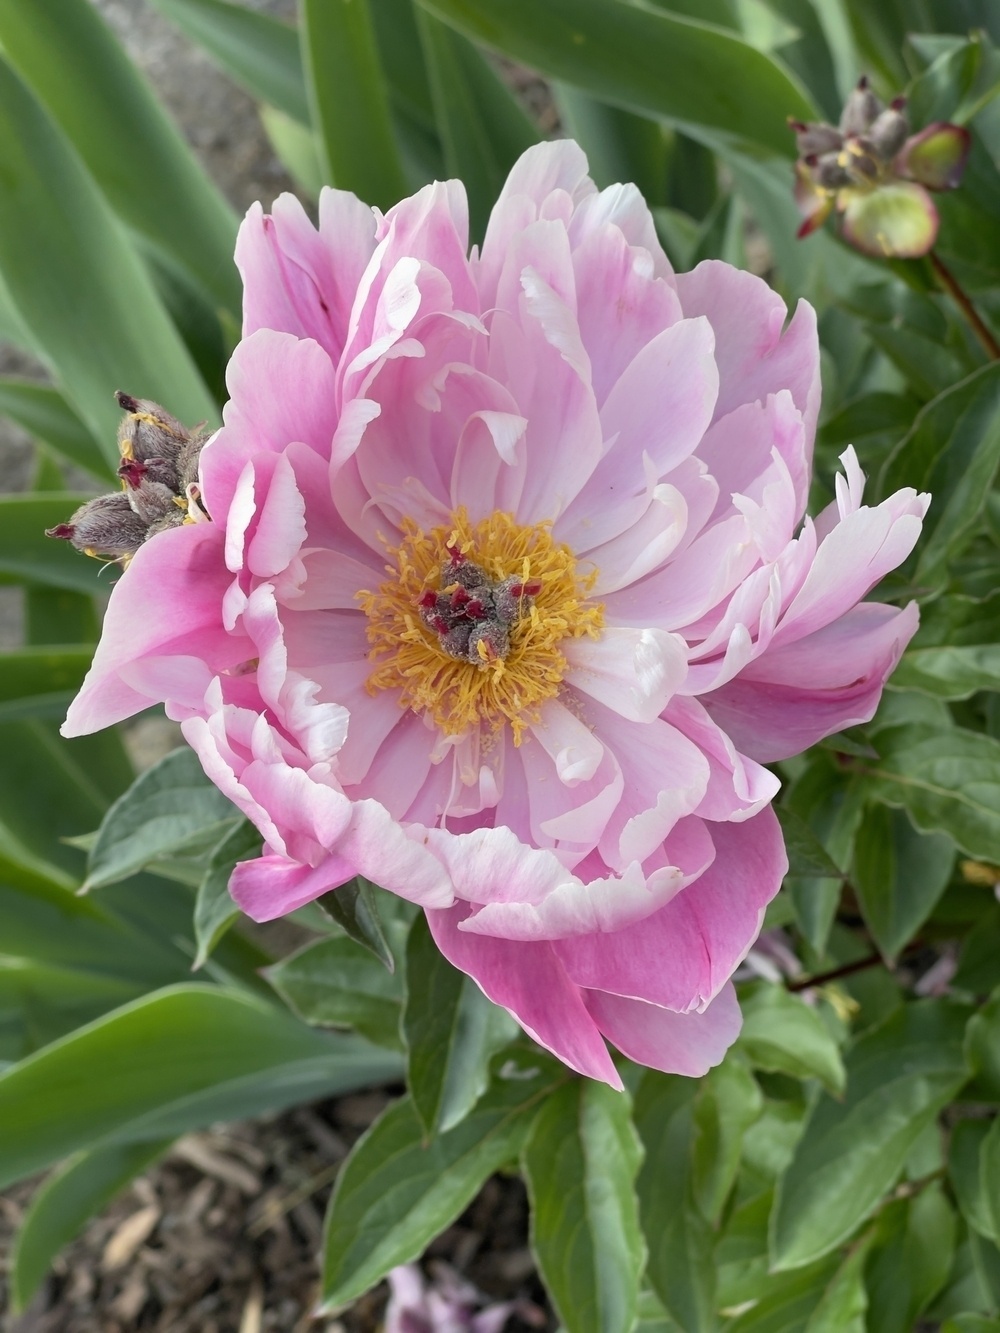 Light pink peony with yellow center.